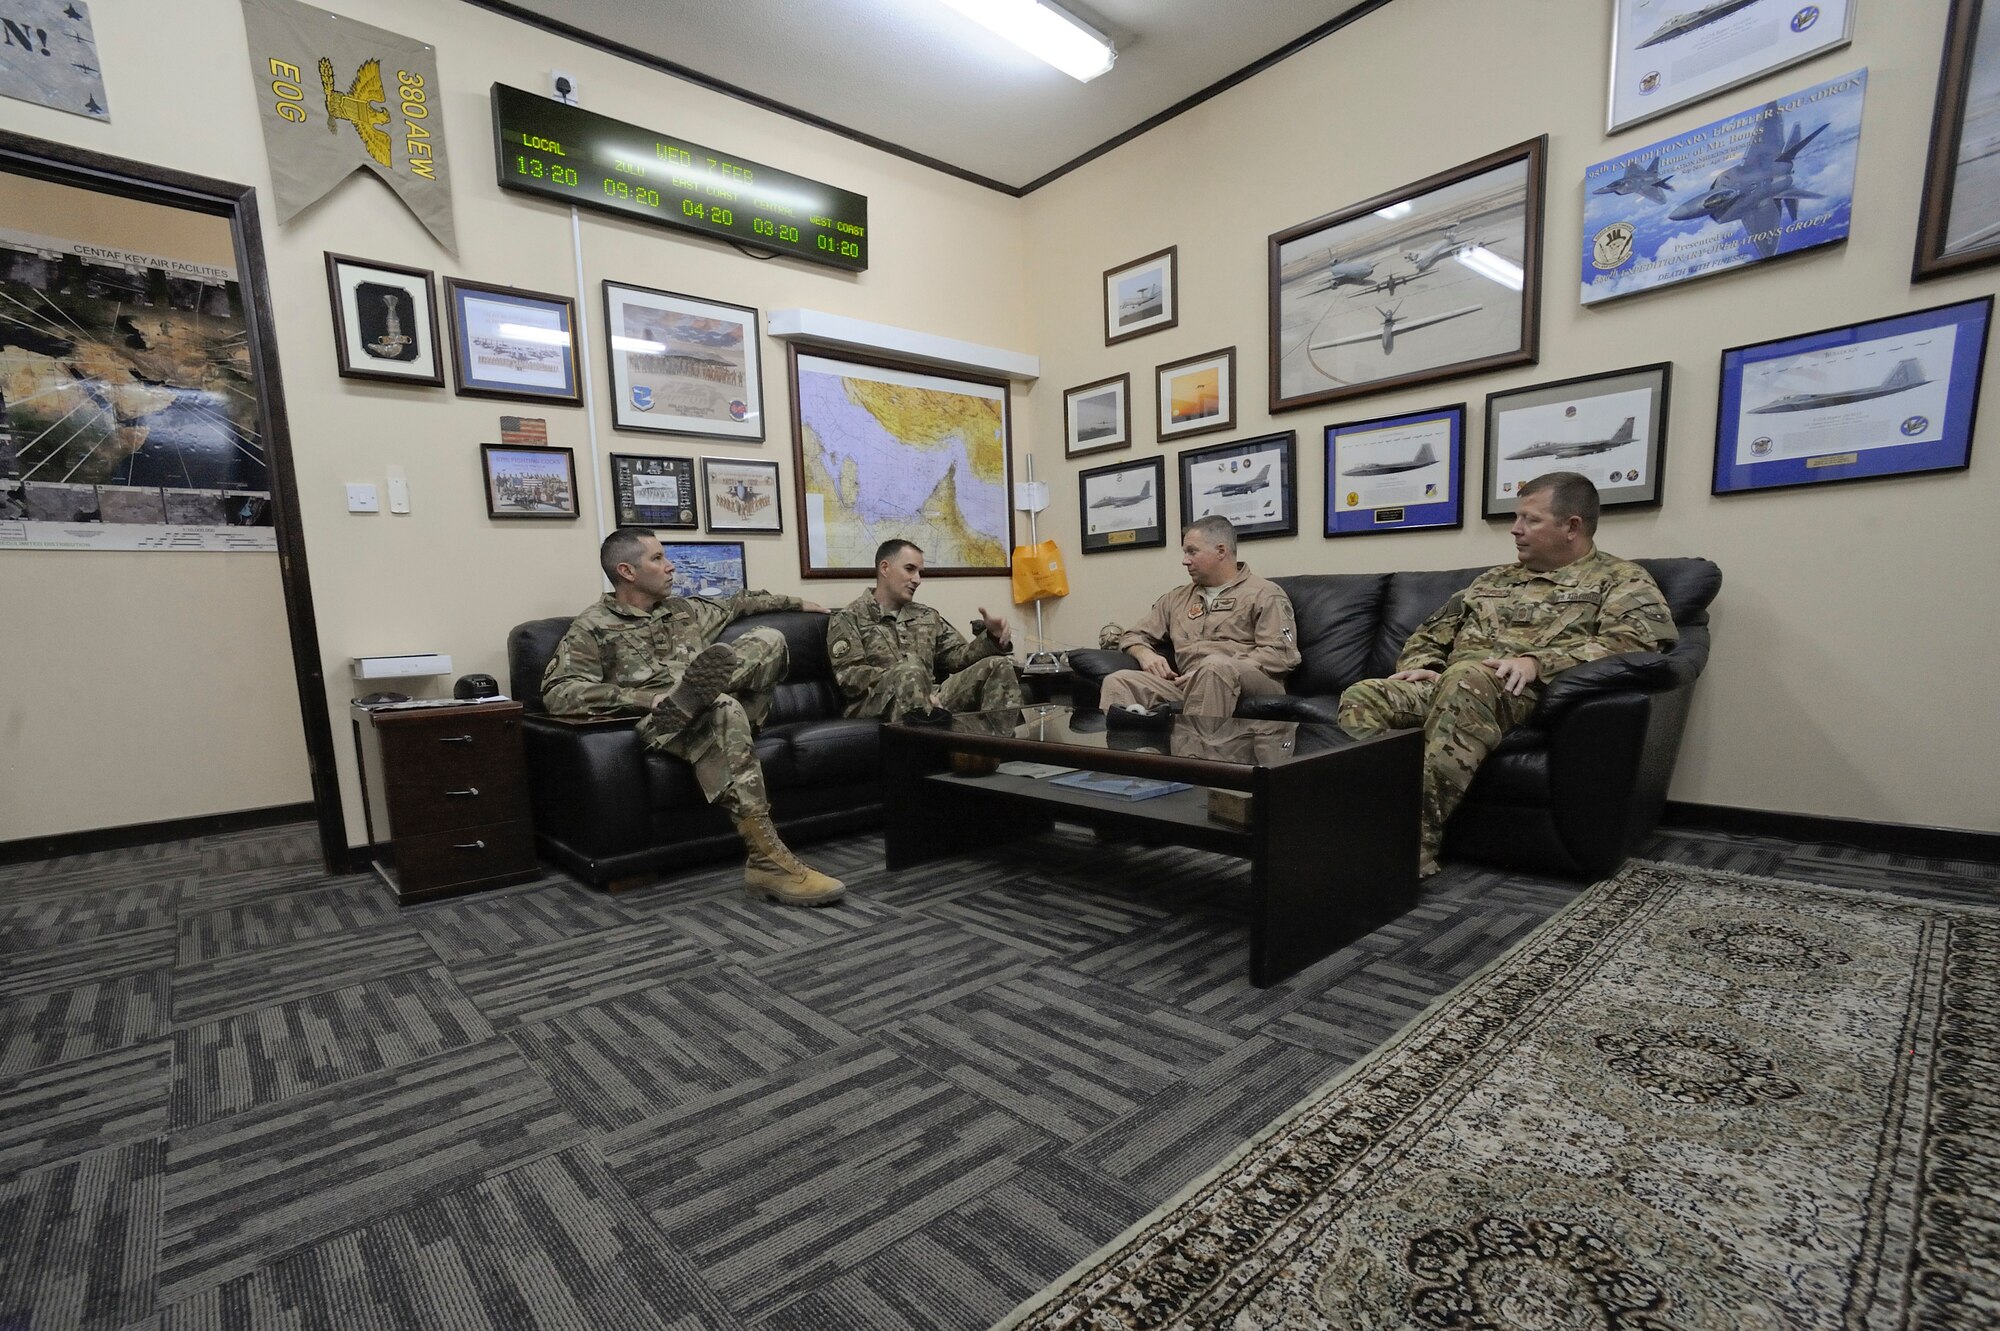 U.S. Air Force Col. Eric Rivera and Col. Troy Morgan, Air Forces Central Command air reserve component advisors, meet with 380th Expeditionary Operations Group leadership on Al Dhafra Air Base, United Arab Emirates, Feb. 7, 2018. The ARC advisors traveled to ADAB in an effort to ease the transition between deployments for Air National Guardsmen and Air Force Reservists. (U.S. Air Force photo by Airman 1st Class D. Blake Browning)